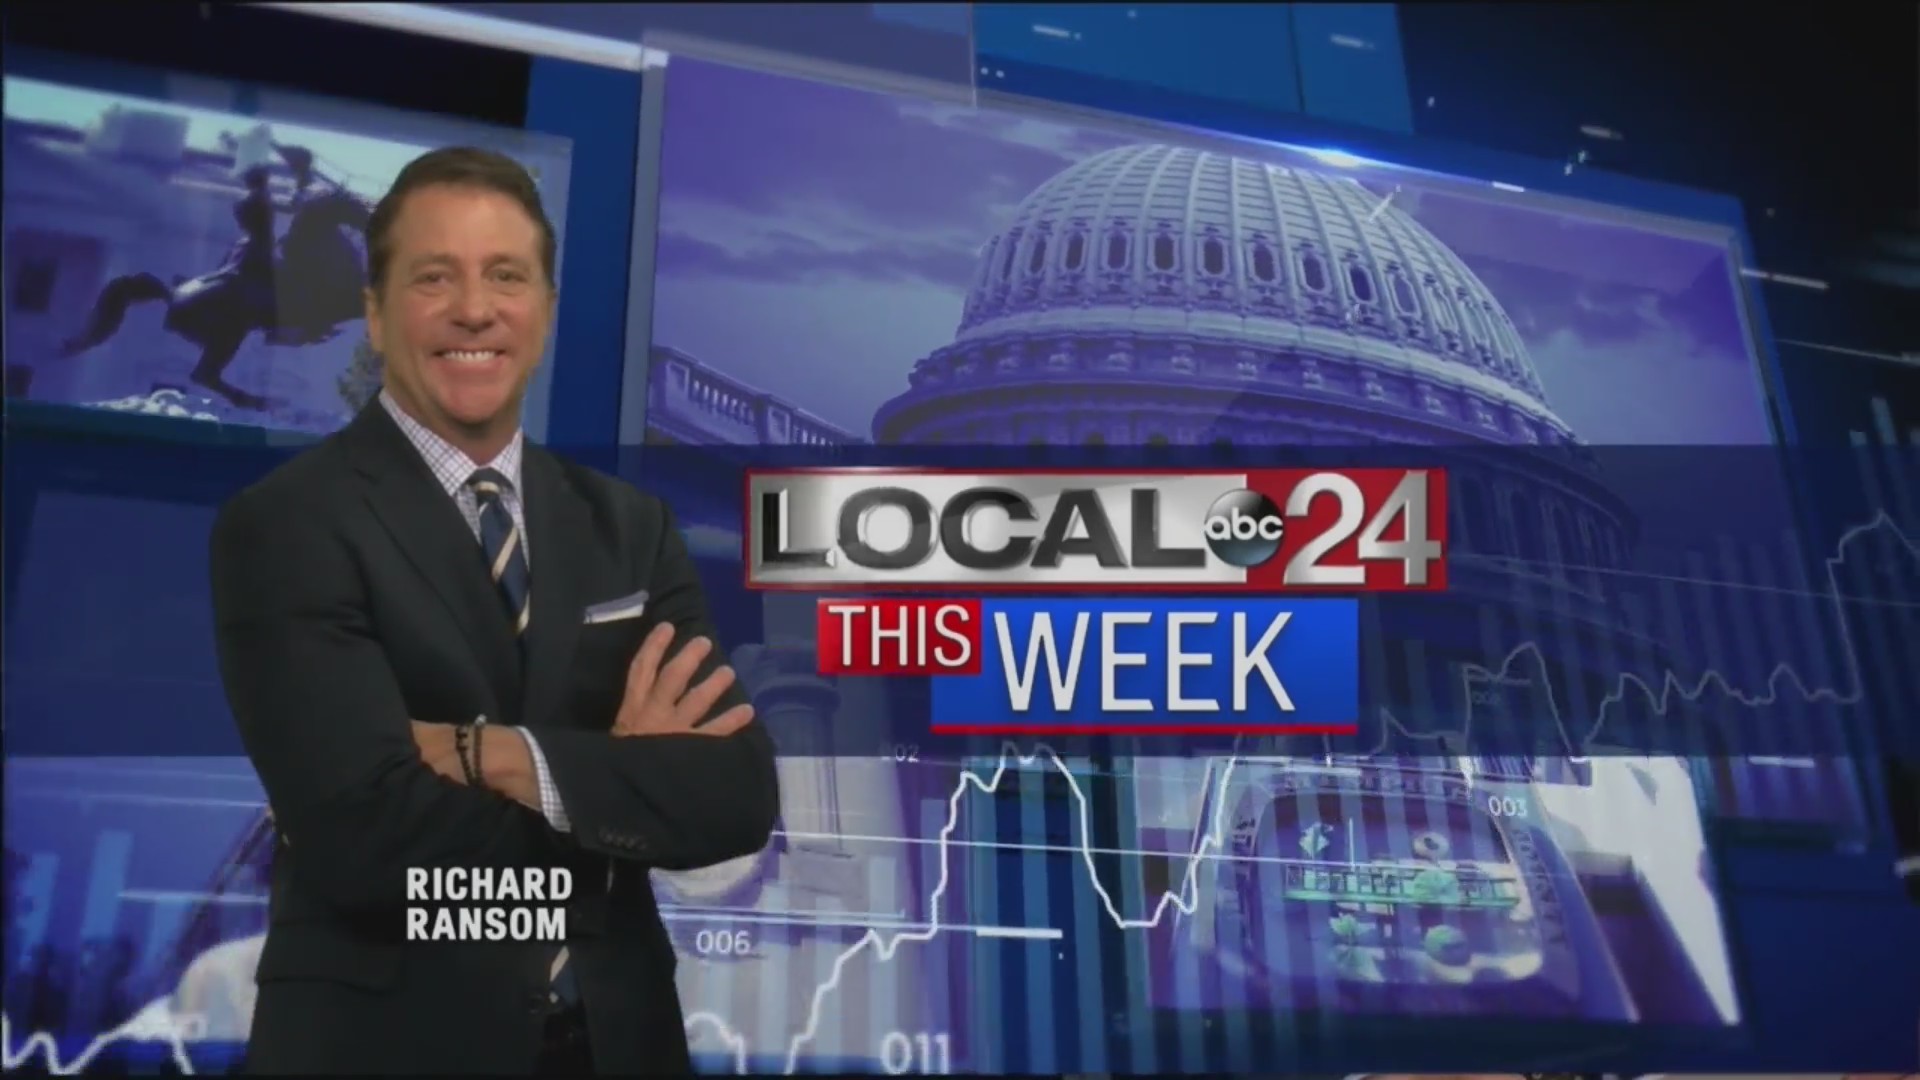 Local 24 This Week, February 23, 2020